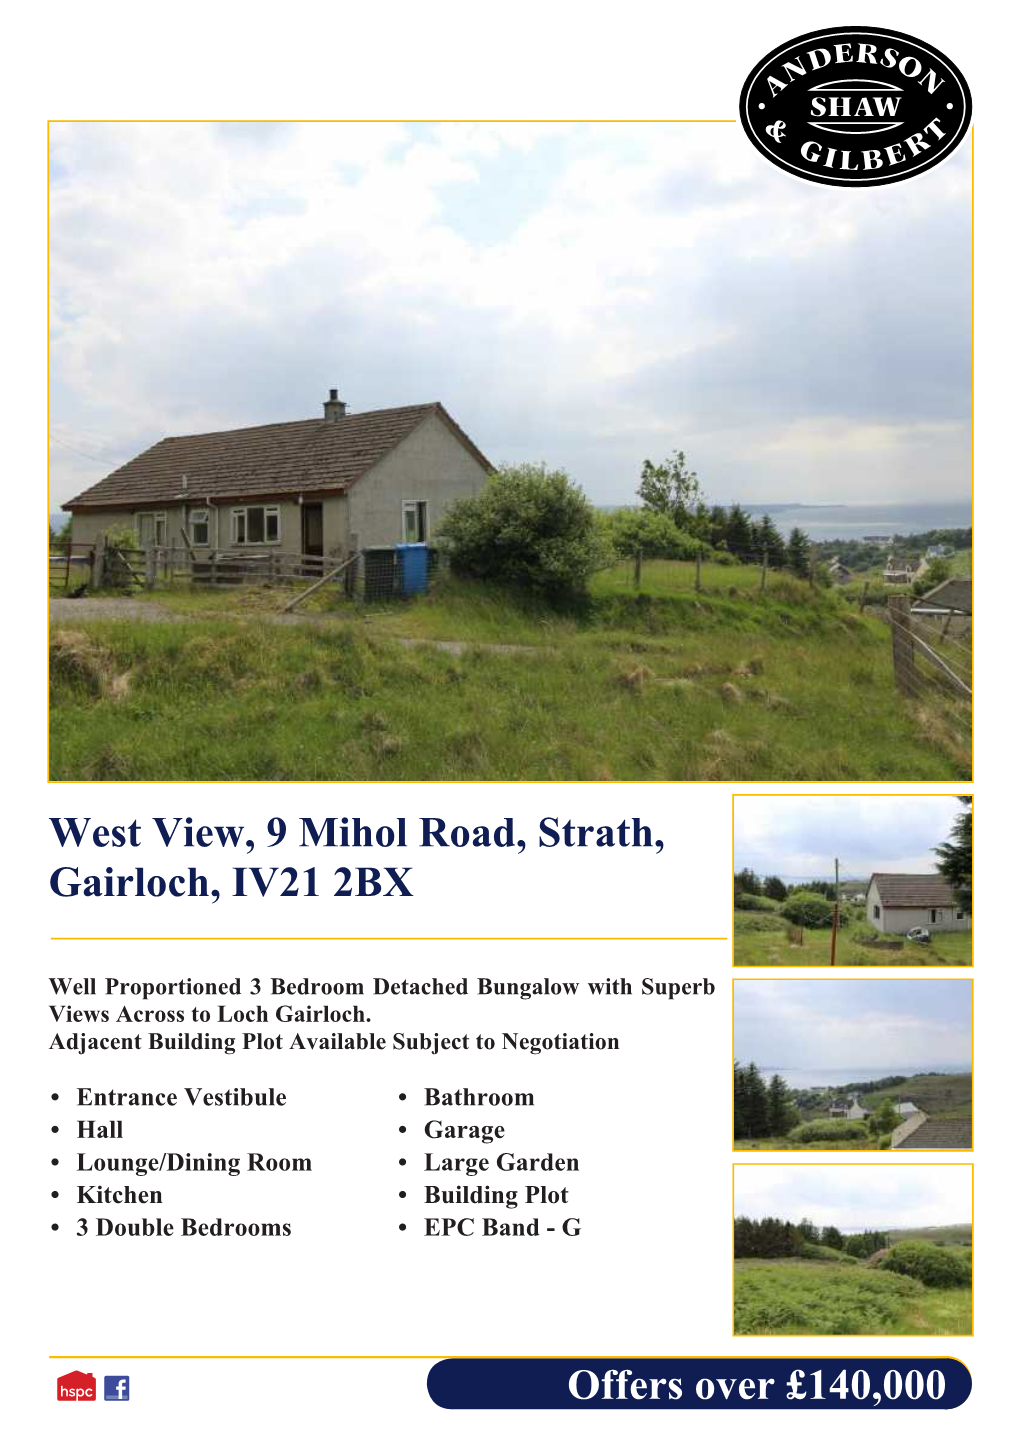 Offers Over £140,000 West View, 9 Mihol Road, Strath, Gairloch, IV21